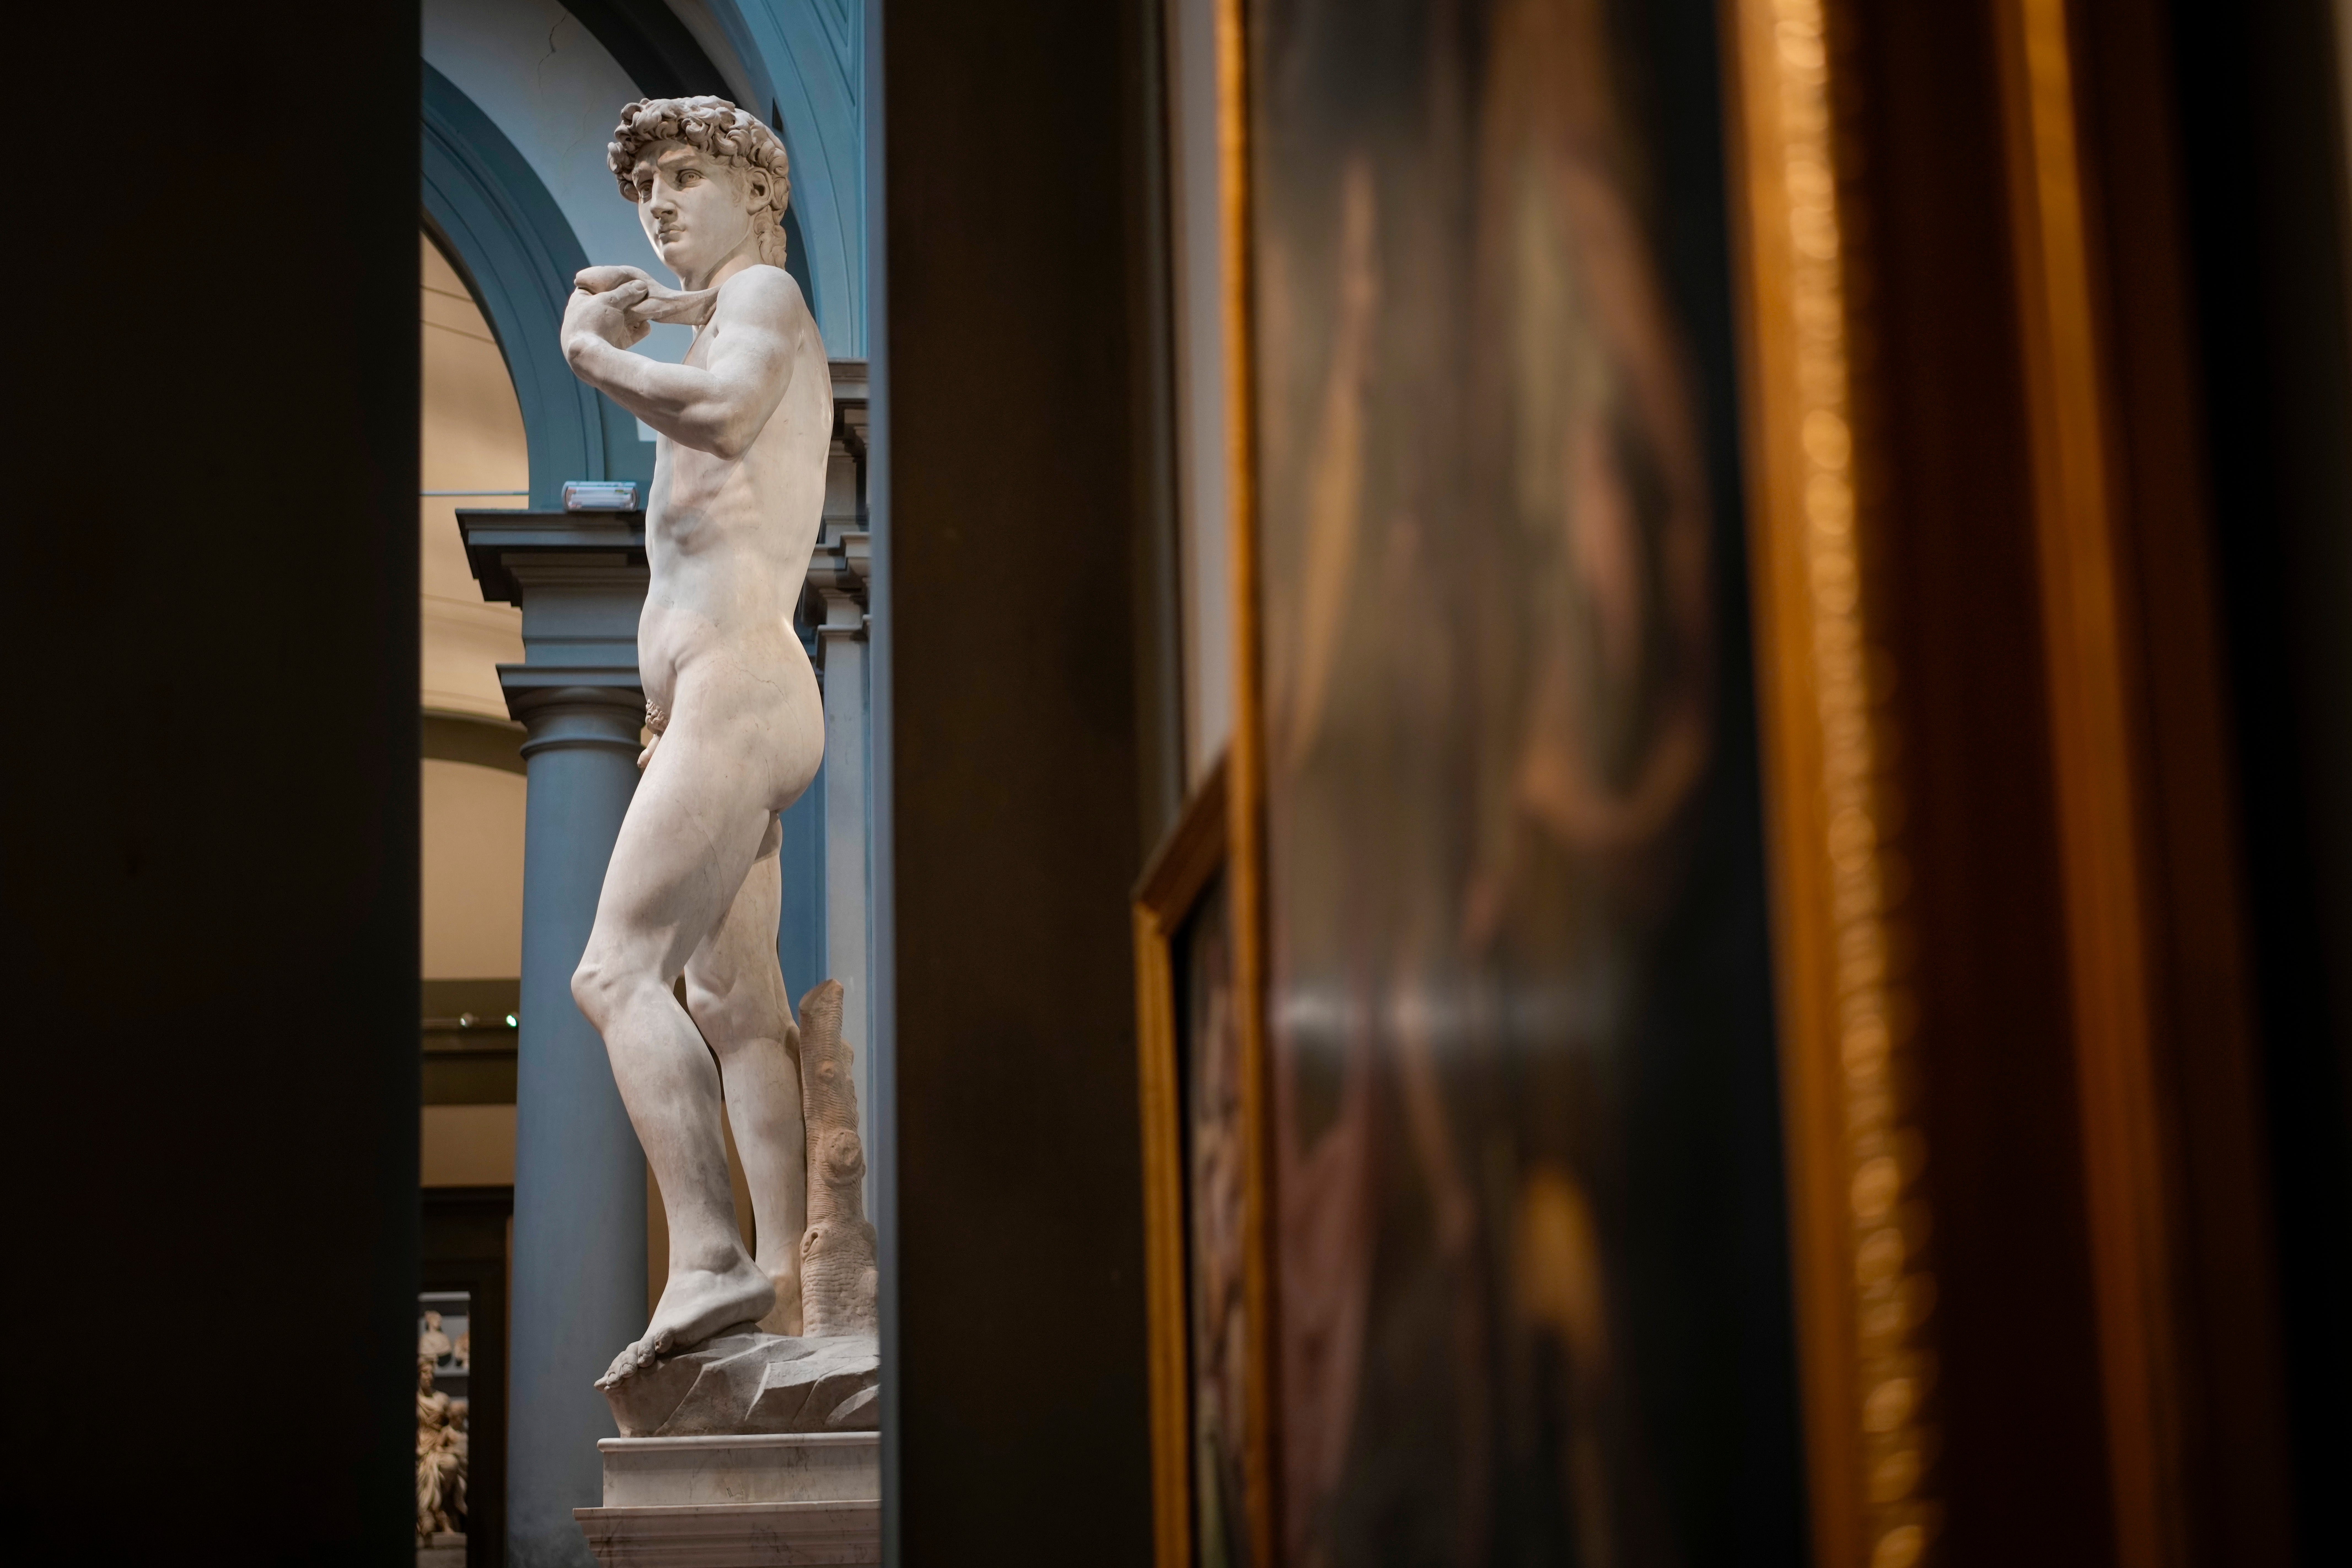 David in situ at the Accademia Gallery in Florence